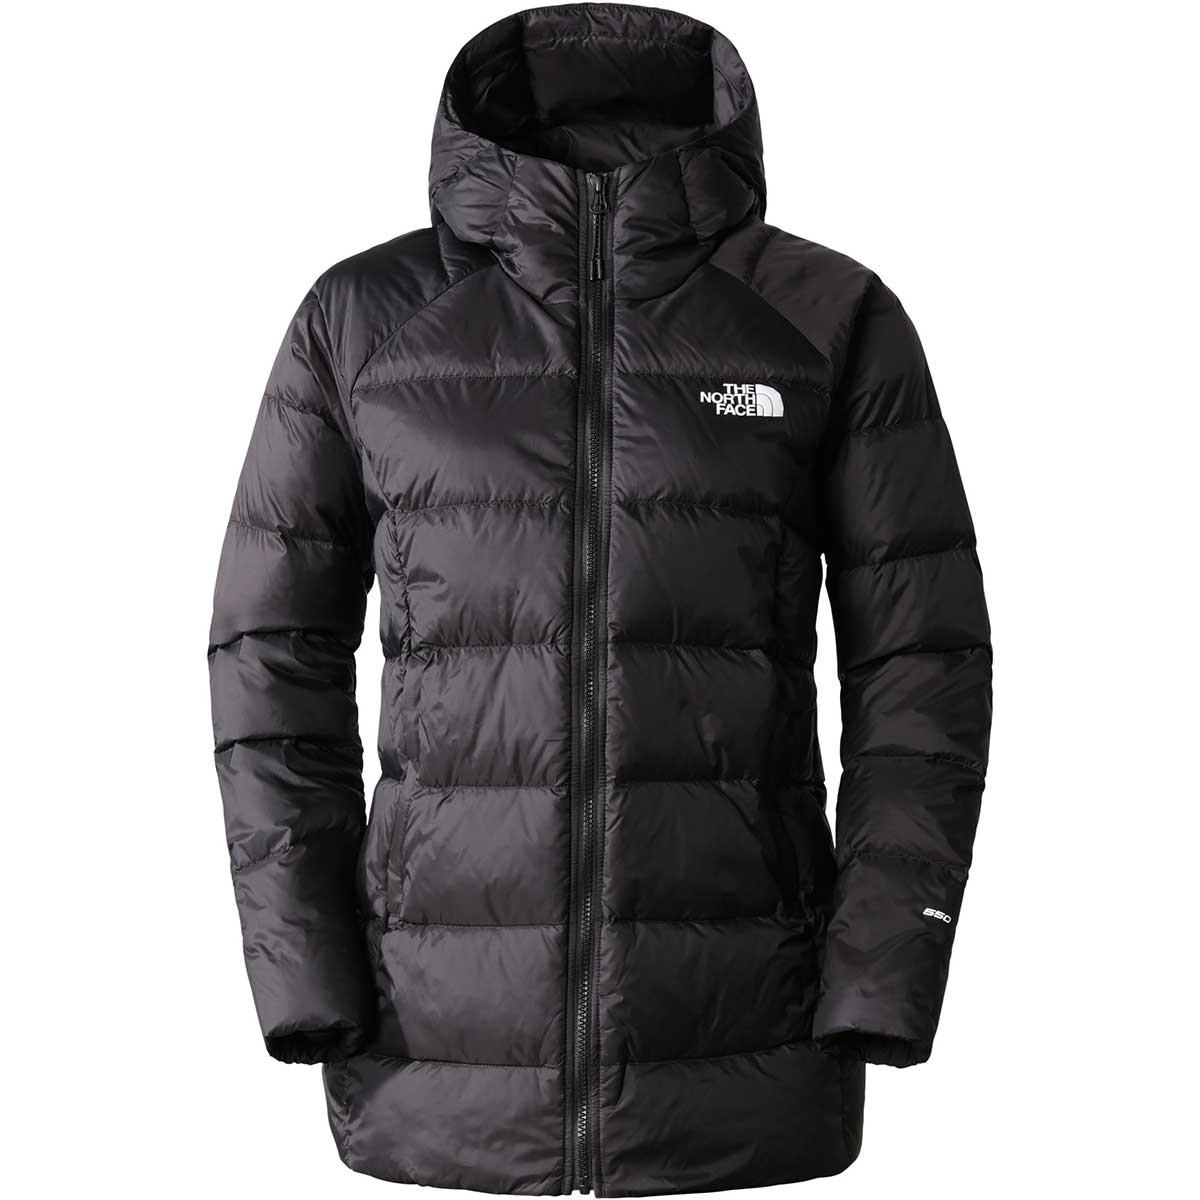 The North Face Damen Hyalite Down Parka von The North Face